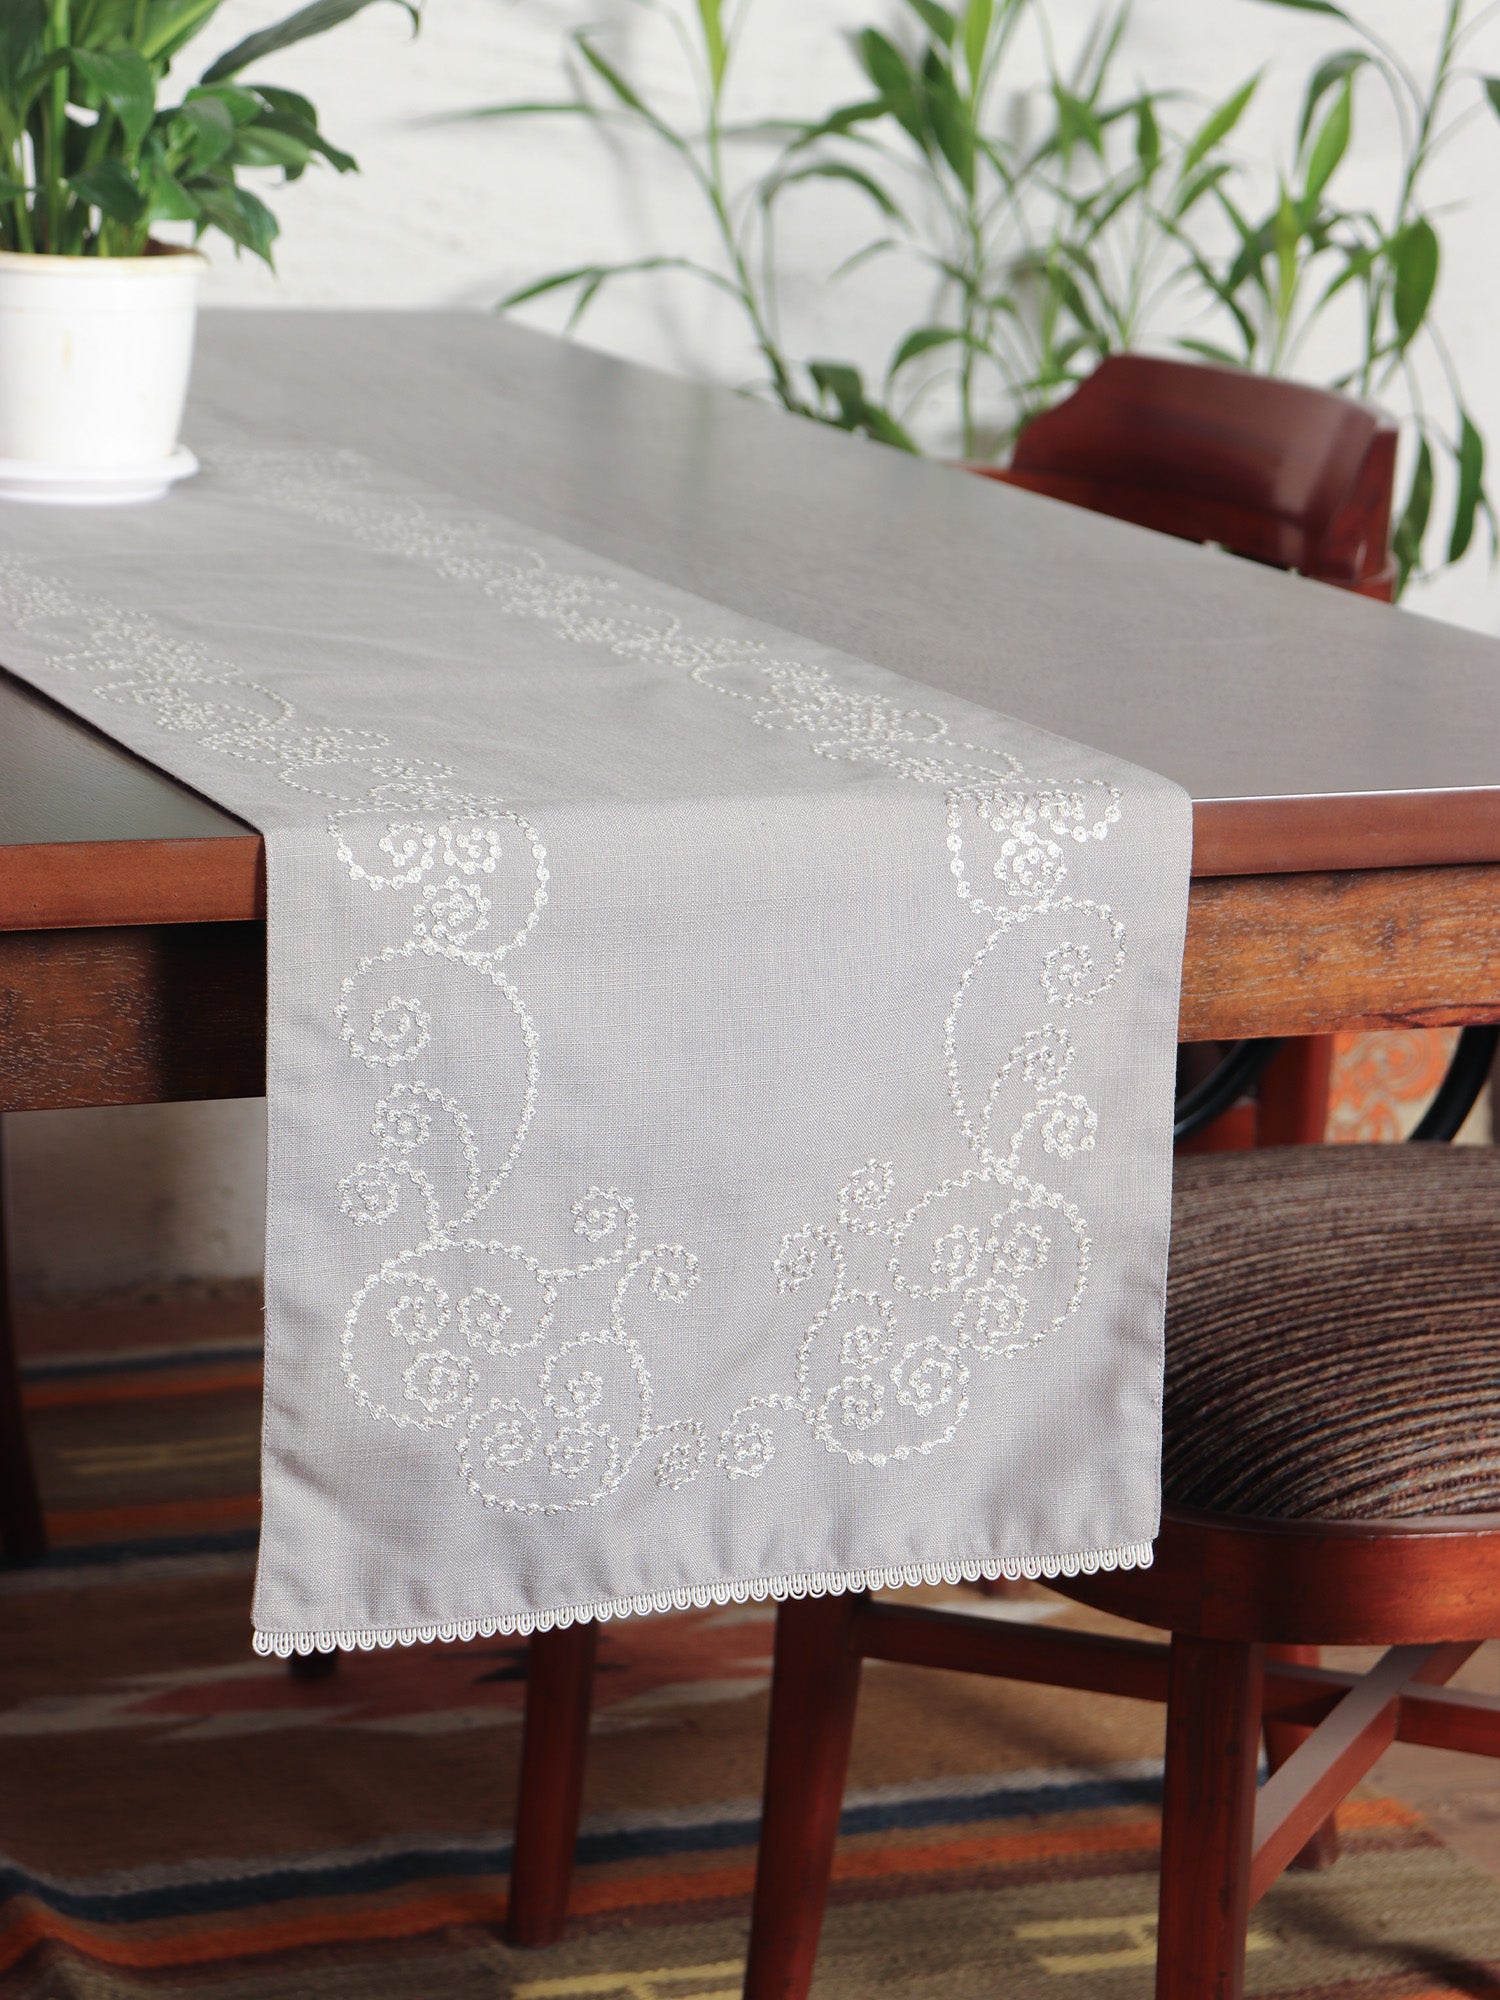 Zeba World (Luxury) Table Runner with Dotted Embroidery with Laces on longer ends | Grey 6 Seater Table Runner Cloth, Table Runner for Living Room, Dining Table - 30 cms x 210 cms; 12 x 84 inches